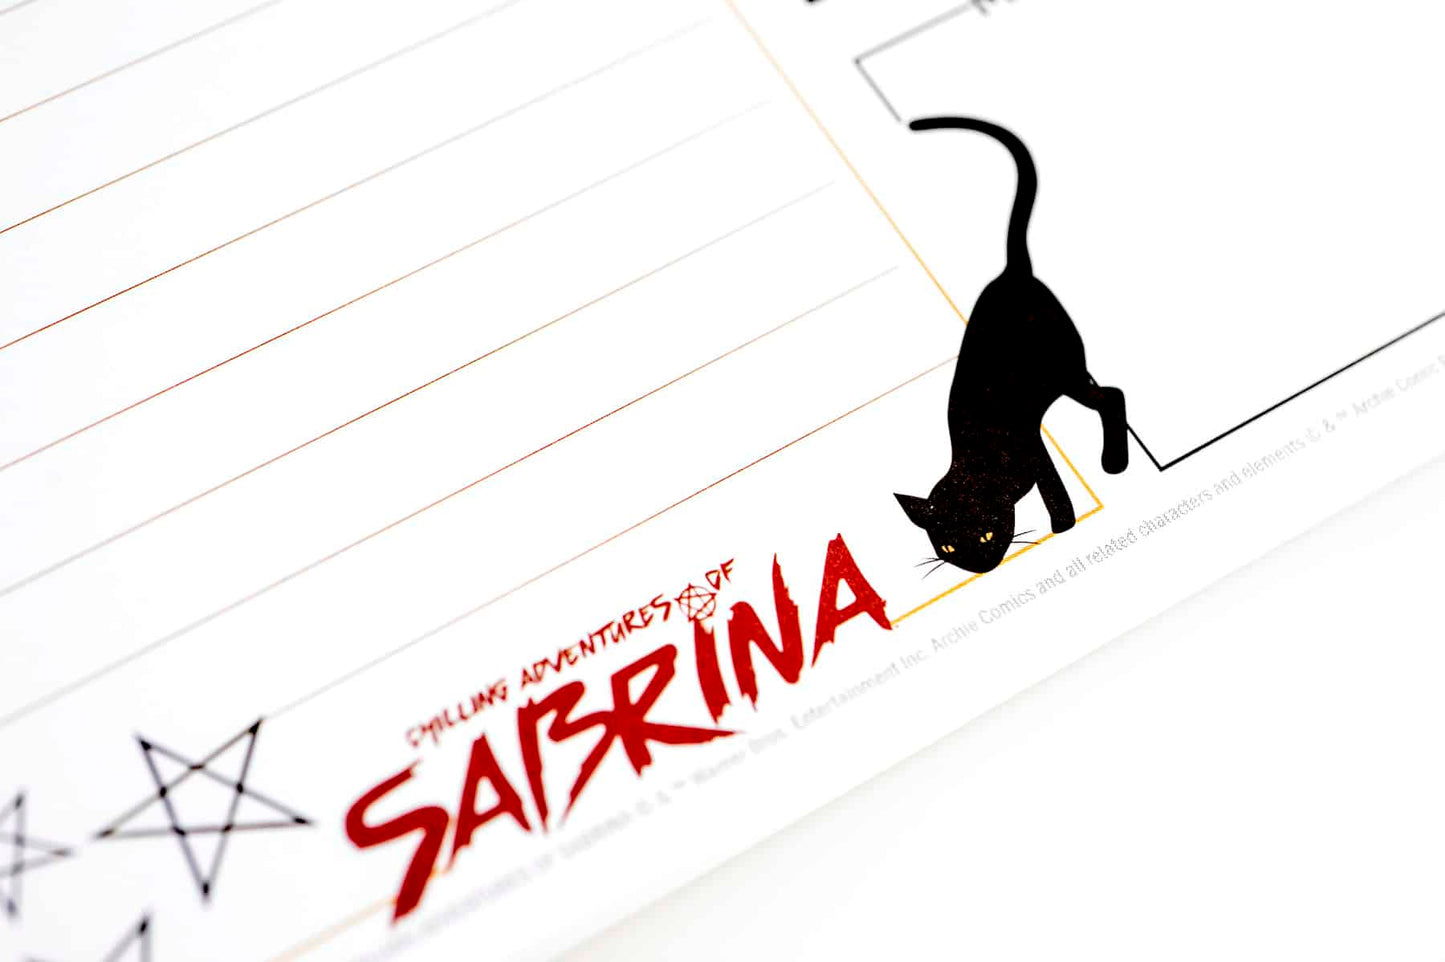 Chilling Adventures of Sabrina Undated Daily Planning Notepad (8'' x 10'')